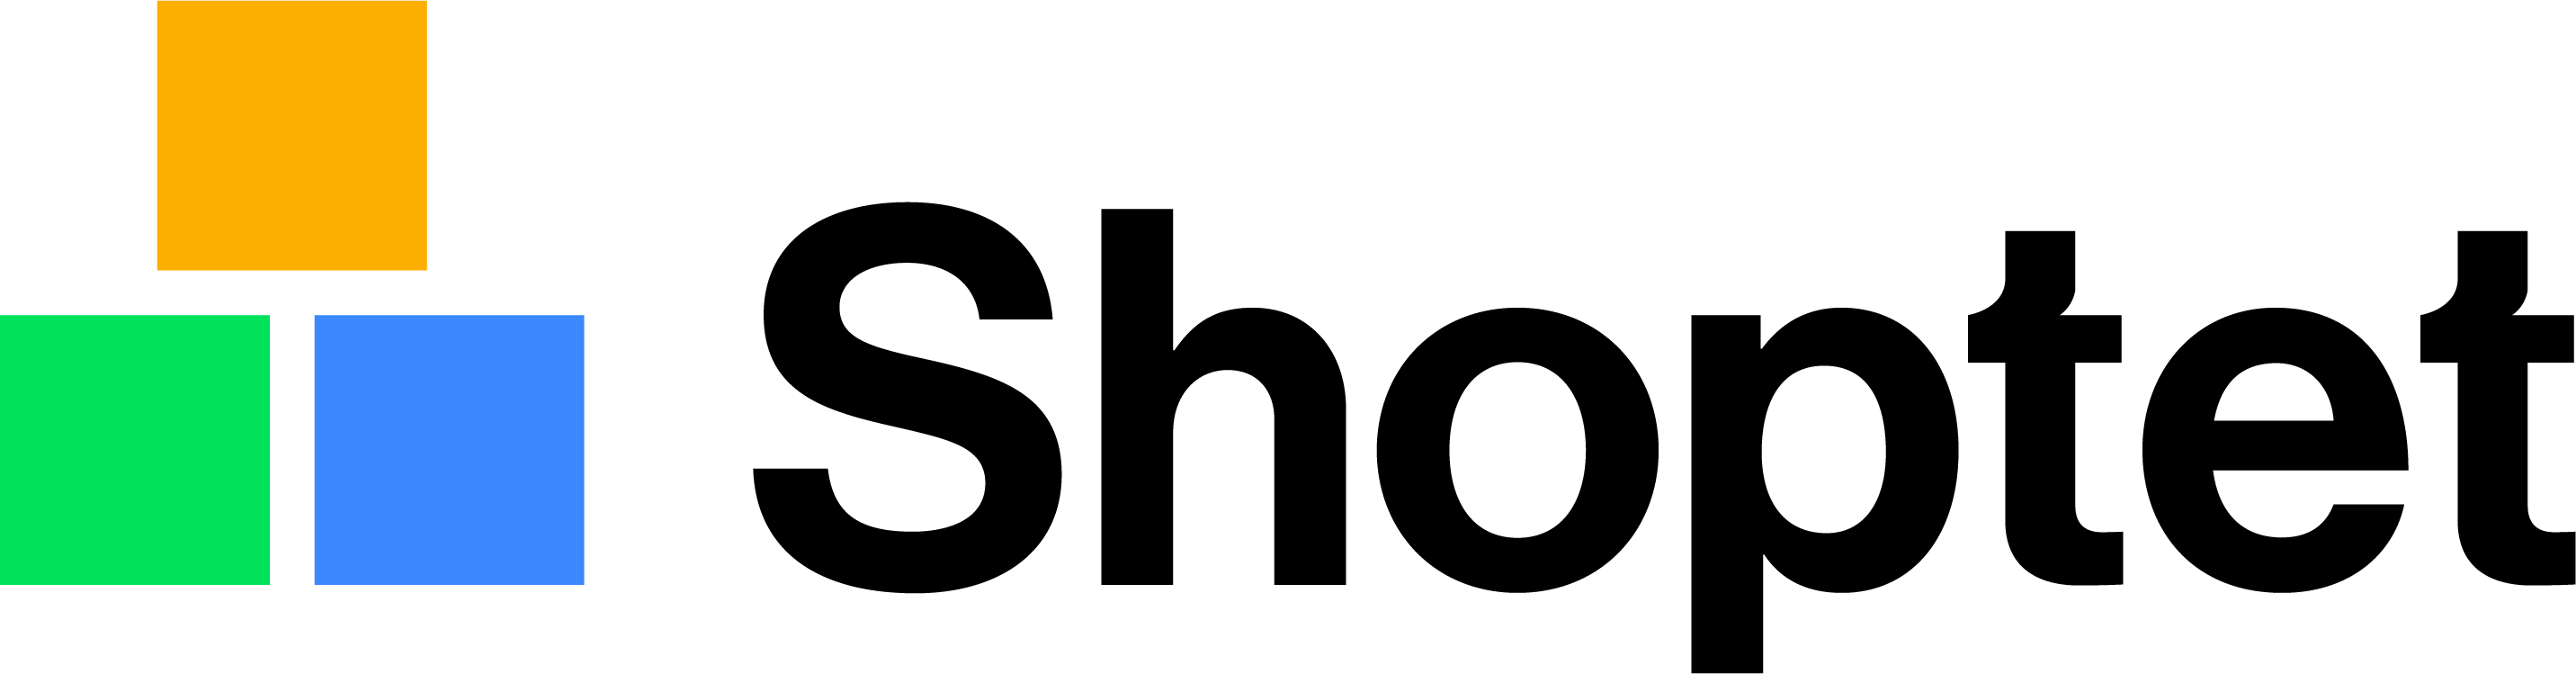 Shoptet-logo-primary.png